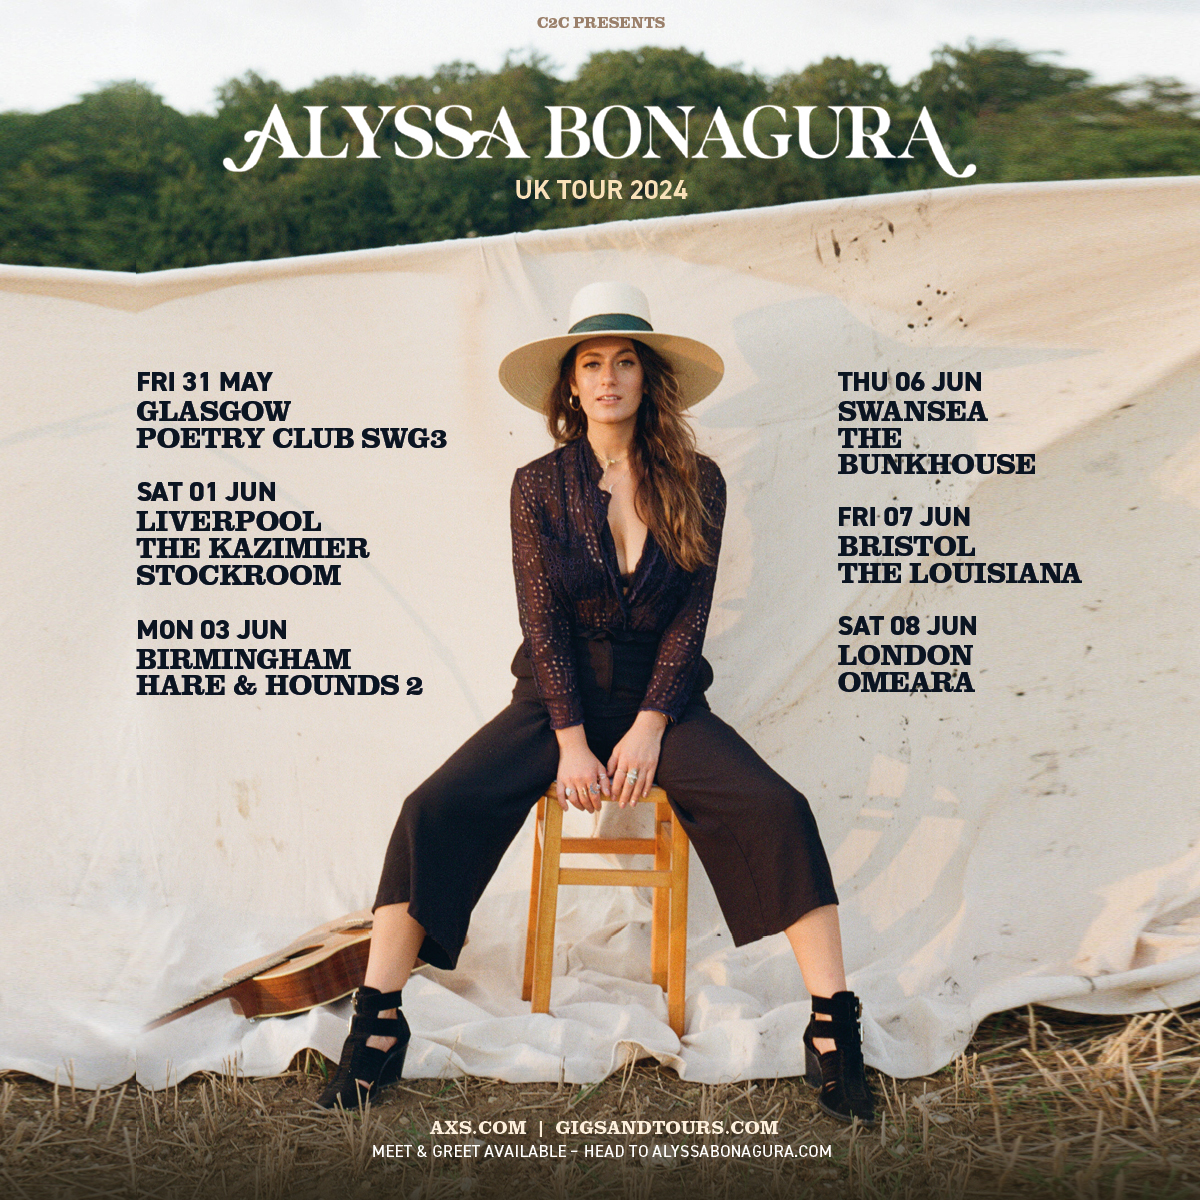 ON SALE NOW! Secure your tickets for @alyssabonagura's UK tour this May/June ✨🎟️ C2C.lnk.to/Presents